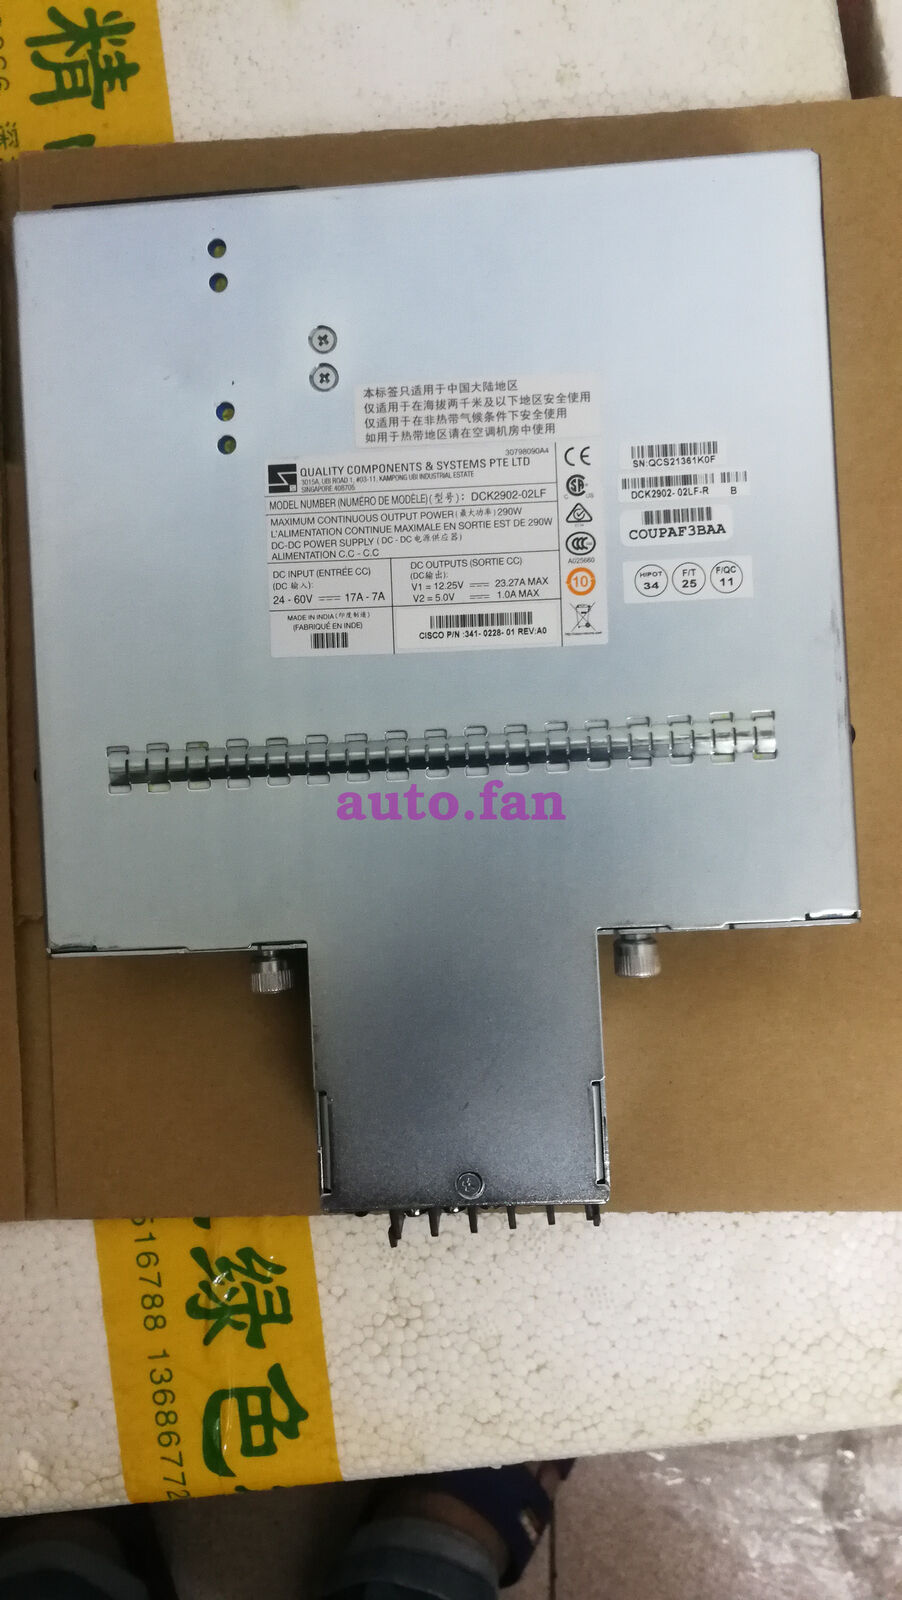 DCK2902-02LF DC Power Supply Used on Cisco PWR-2921 / 2951-DC Router